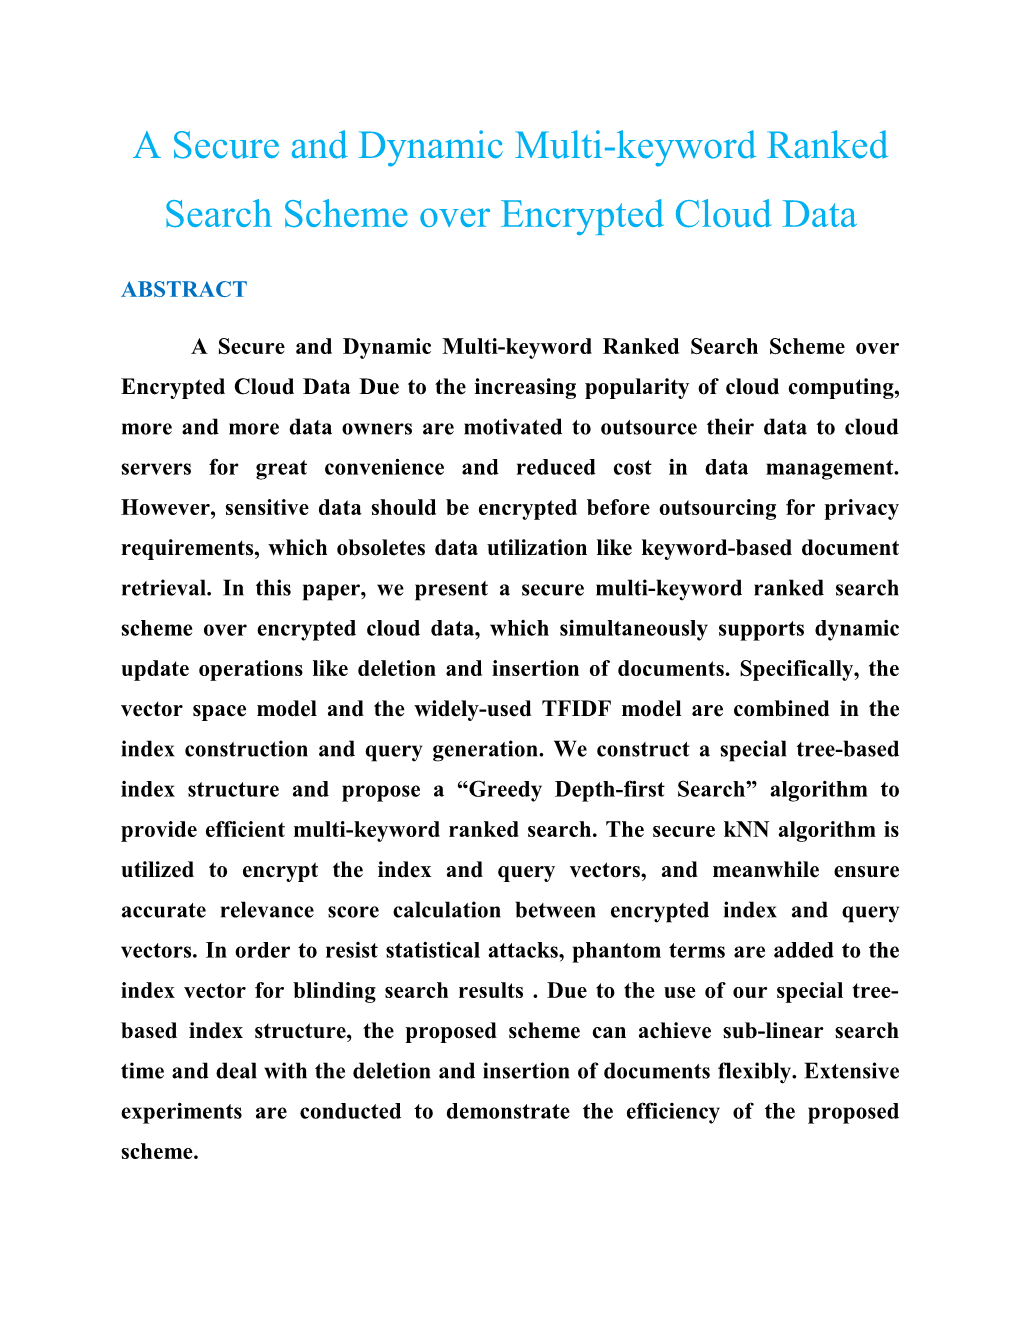 A Secure and Dynamic Multi-Keyword Ranked Search Scheme Over Encrypted Cloud Data